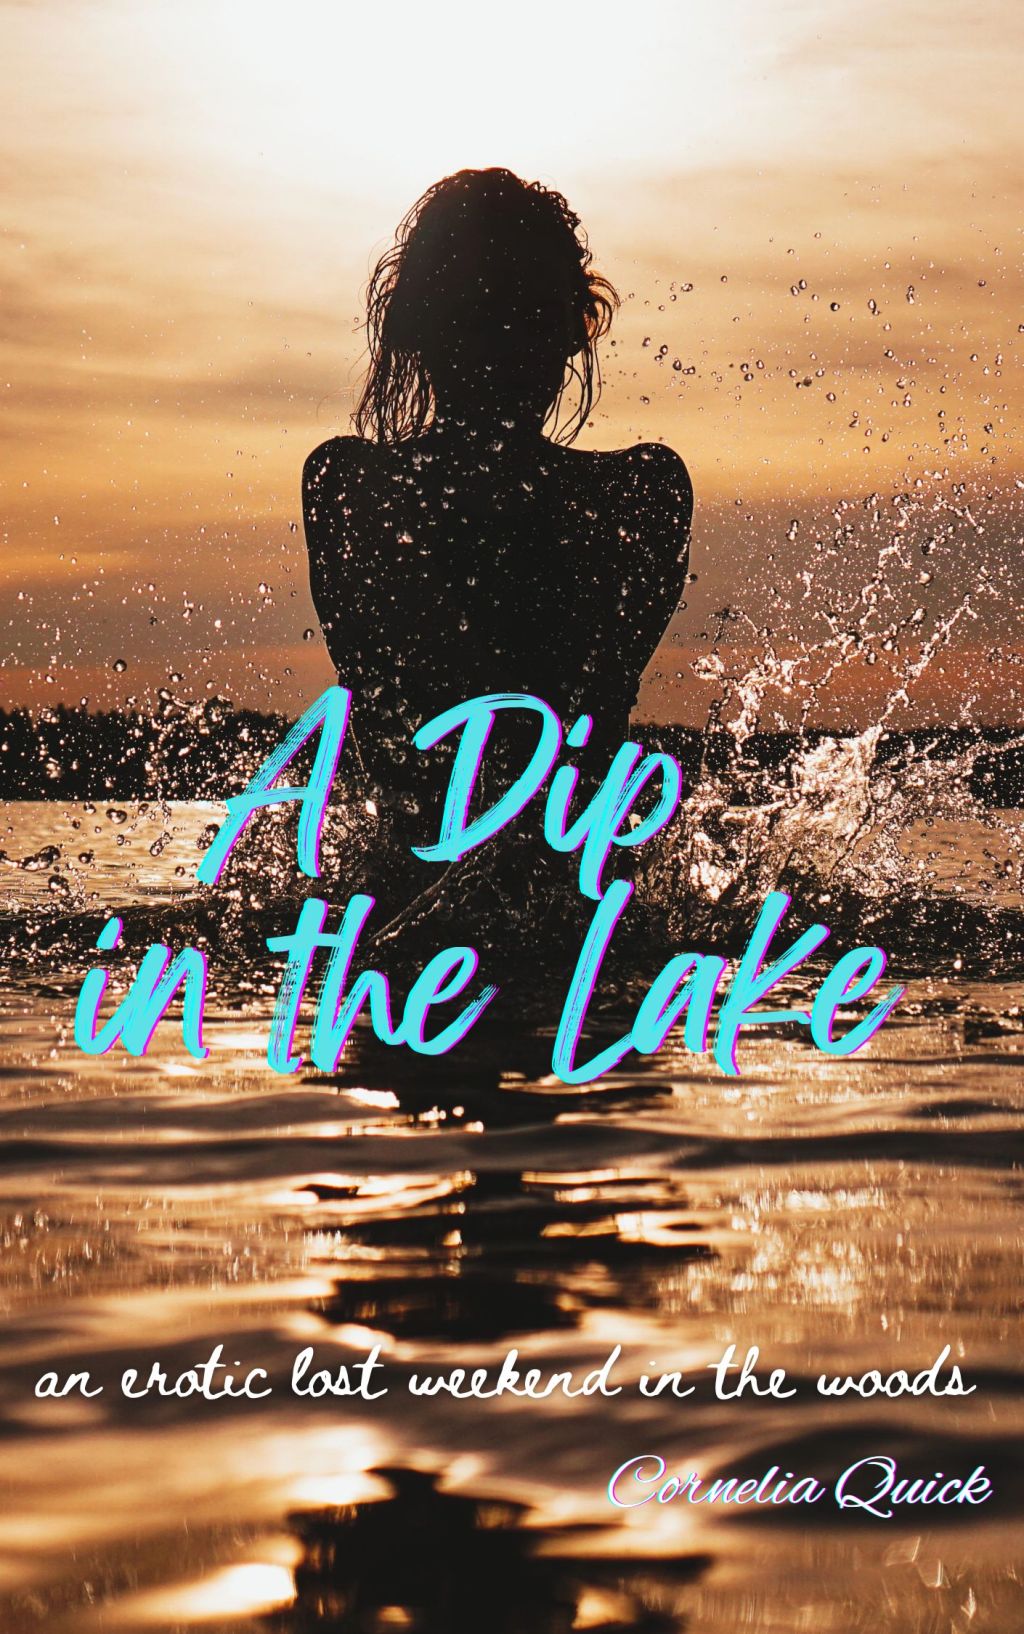 If it’s too hot, take “A Dip in the Lake”